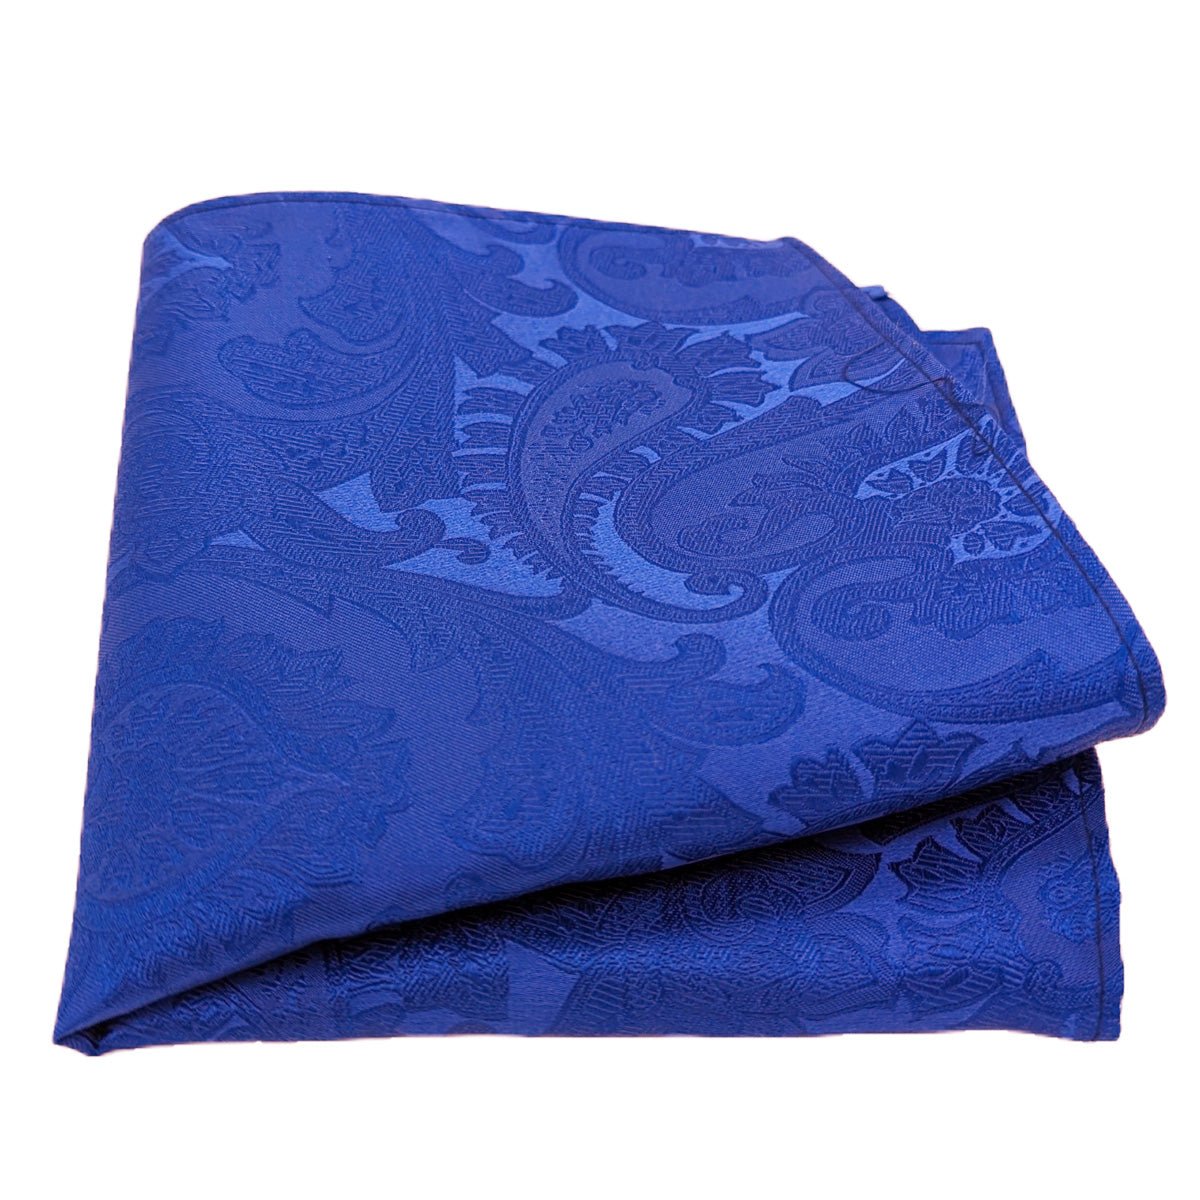 Electric Blue Paisley Silk Pocket Square - Wedding Pocket Square - - Swagger & Swoon